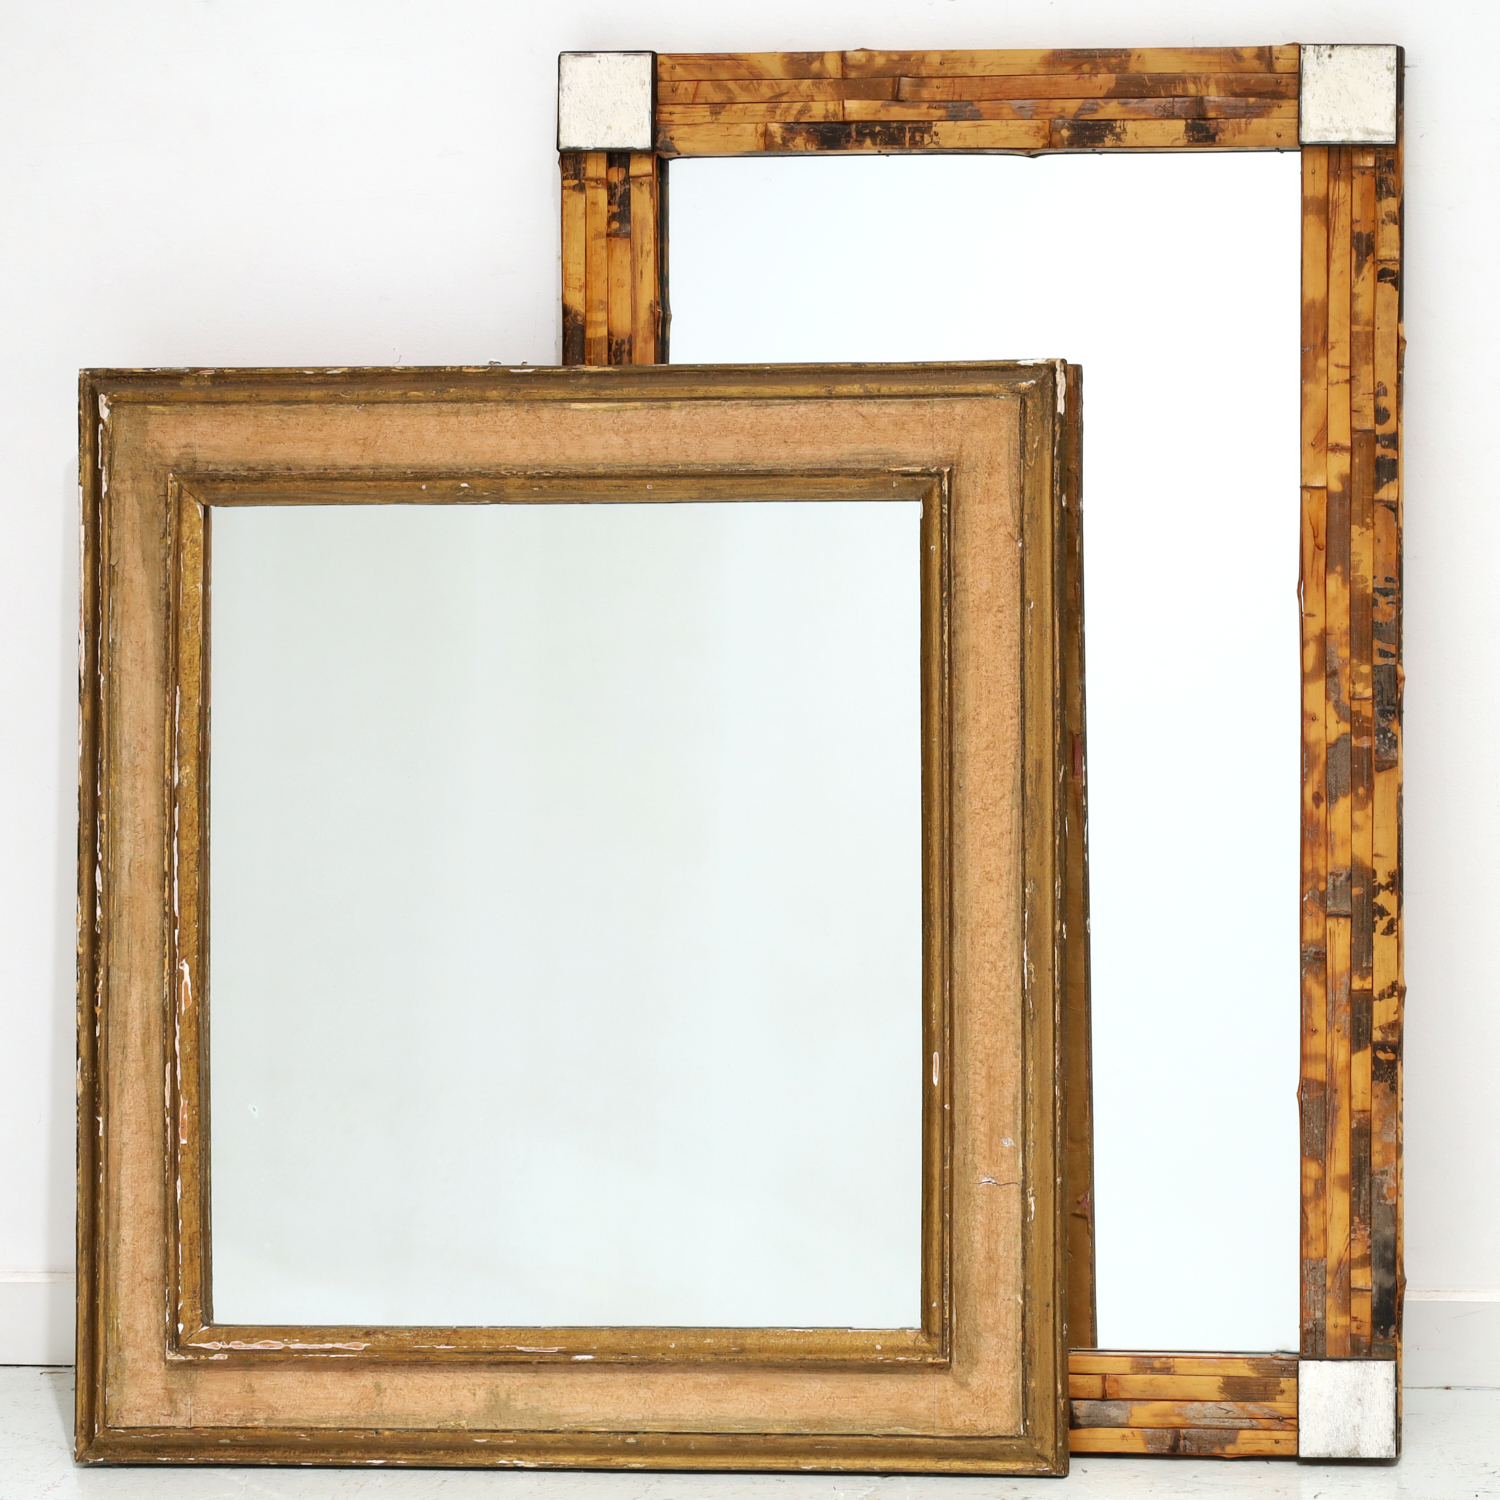 (2) DESIGNER MIRRORS, PAINTED AND